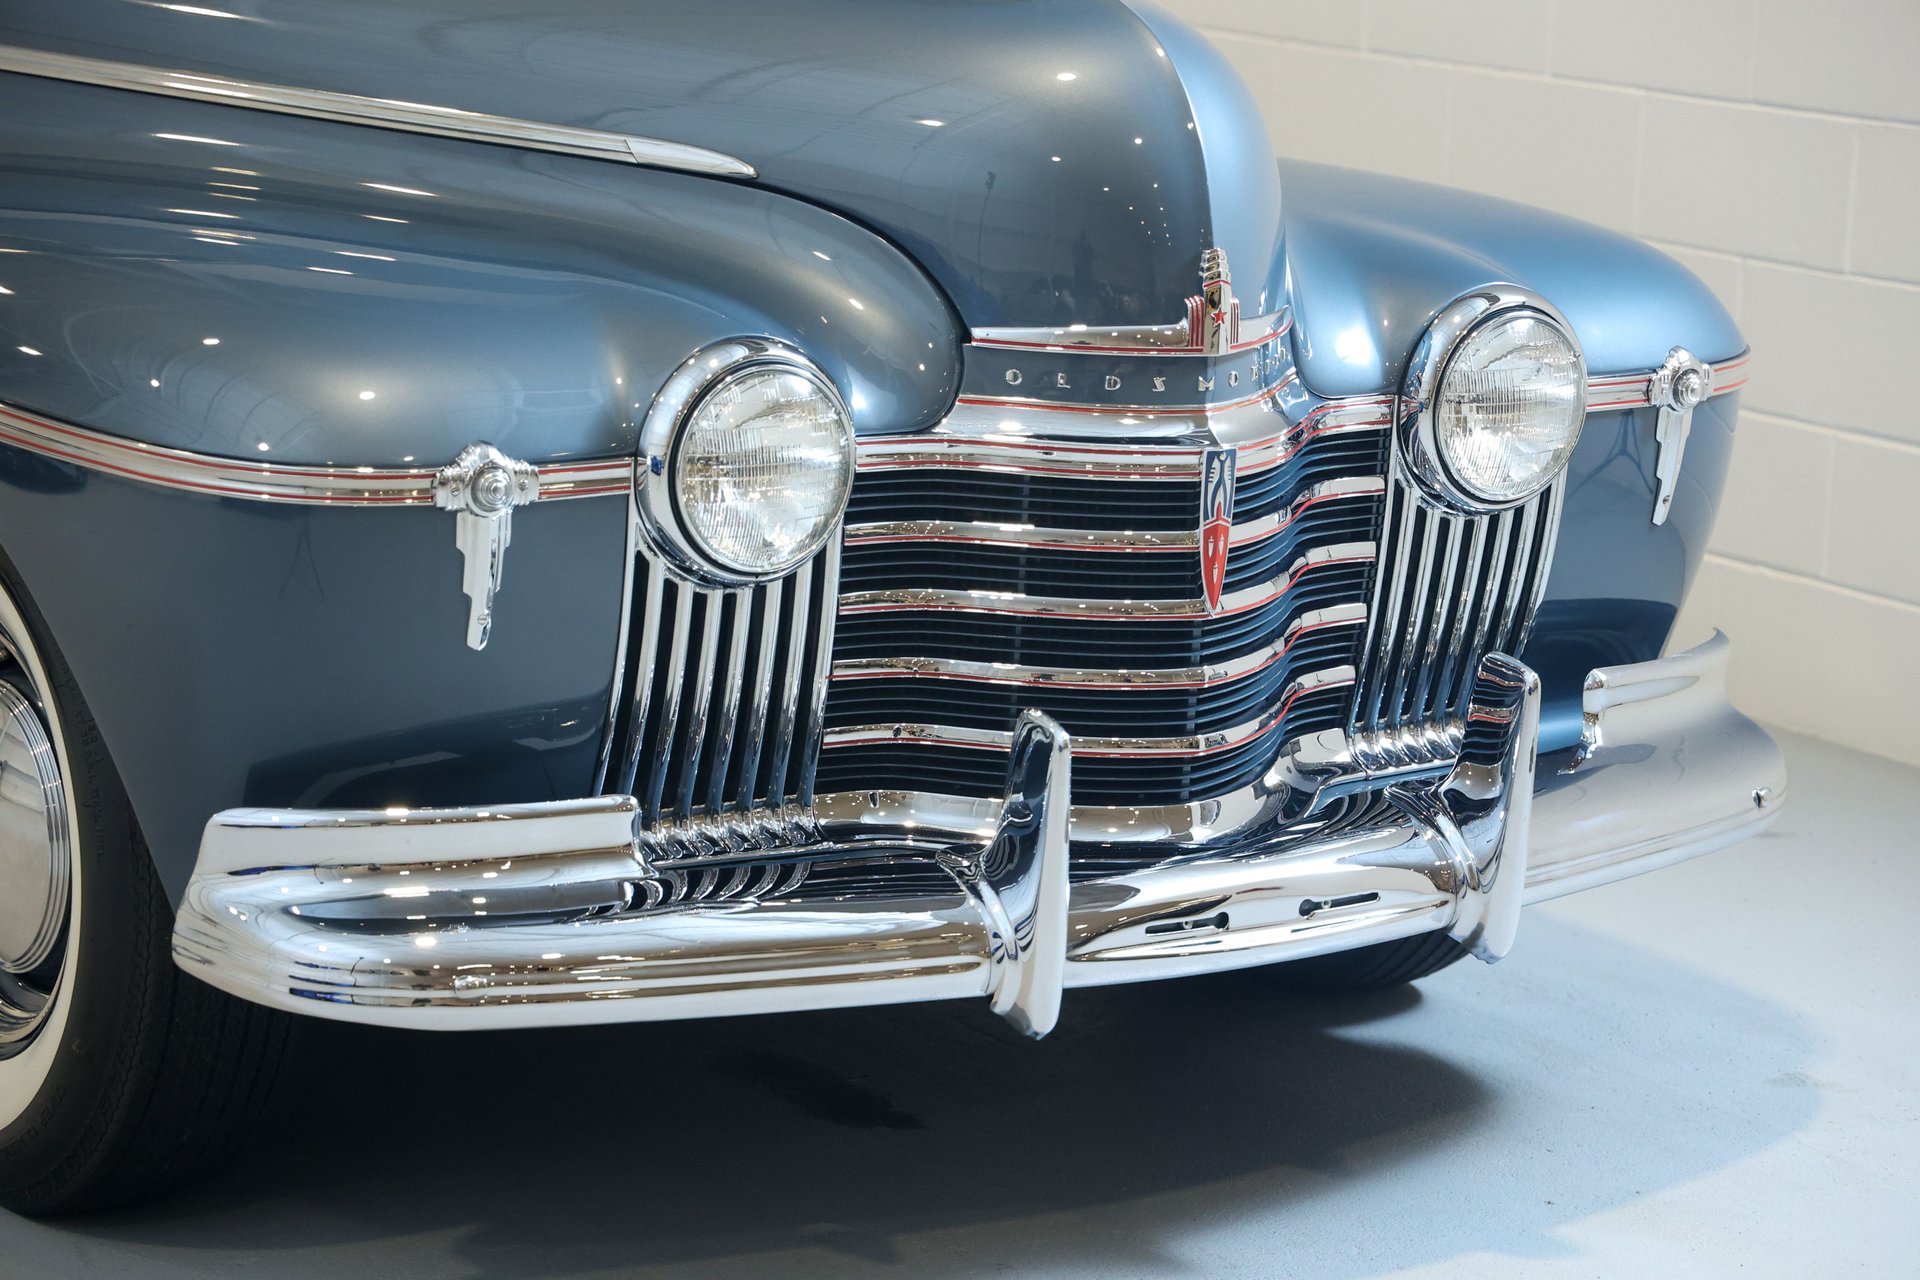 Broad Arrow Auctions | 1941 Oldsmobile Custom Cruiser 98 Convertible Coupe